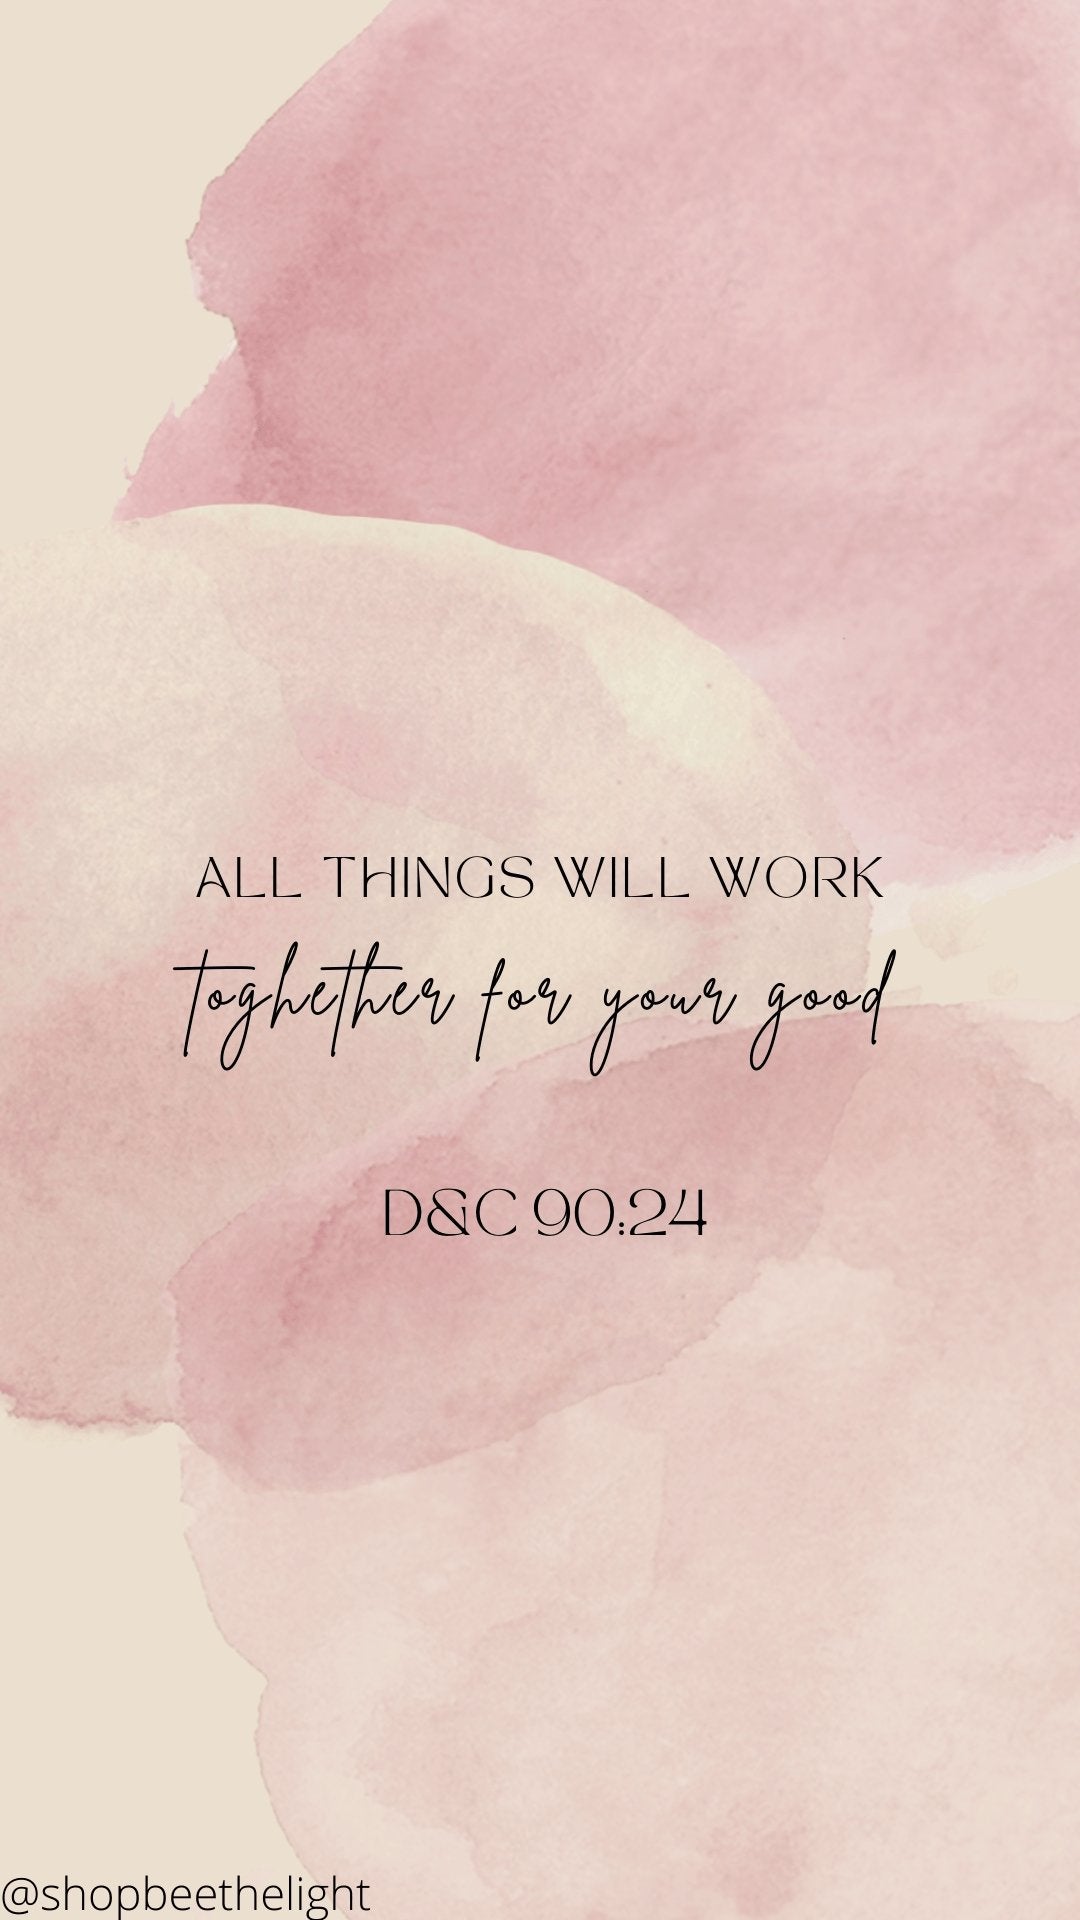 FREE Phone Wallpaper - All things shall work together for your good - Bee The Light